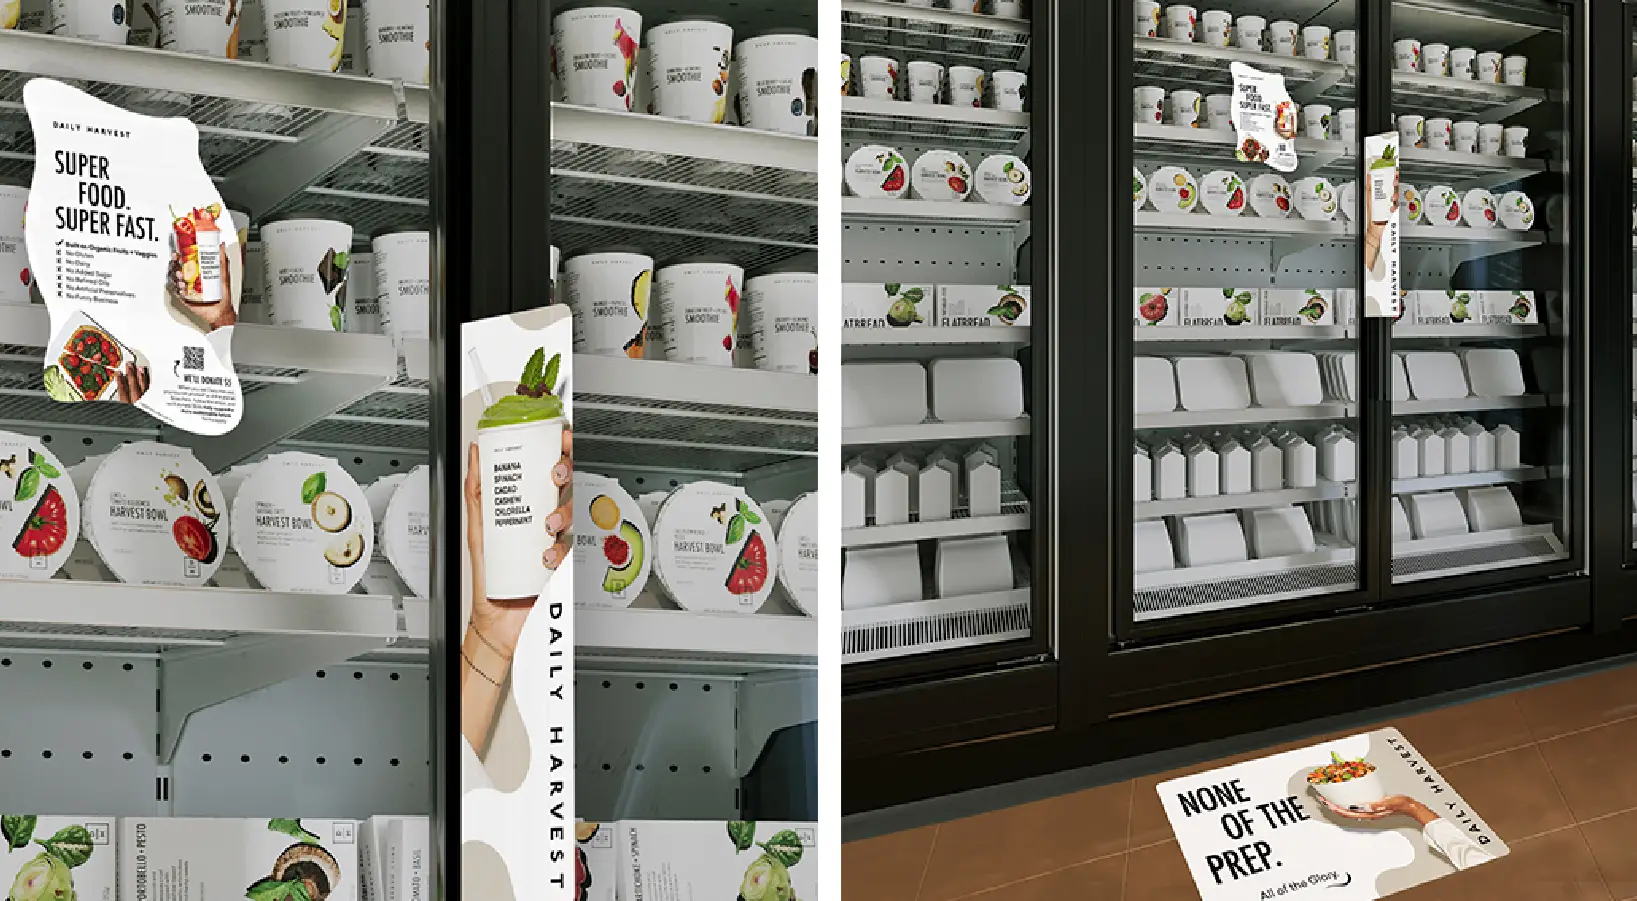 A freezer display in a grocery store full of Daily Harvest prodcuts with a QR Code on a sticker.